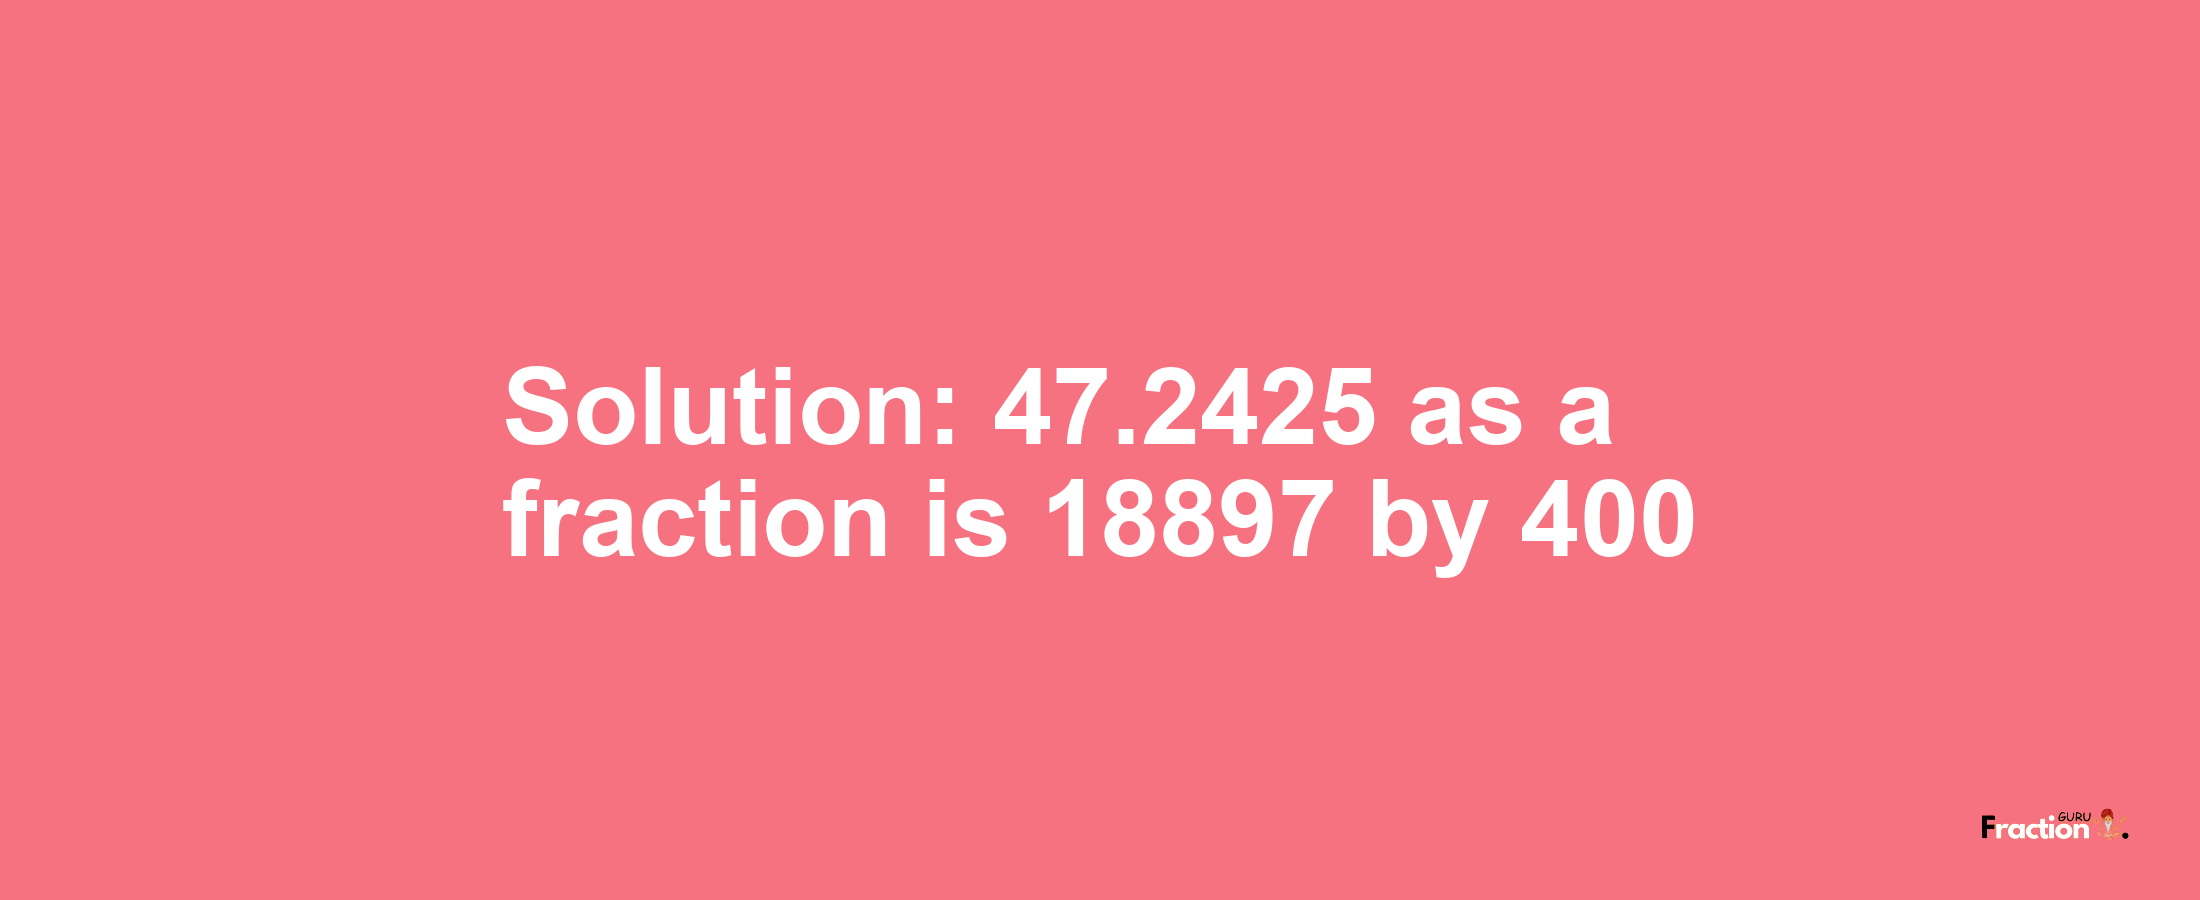 Solution:47.2425 as a fraction is 18897/400